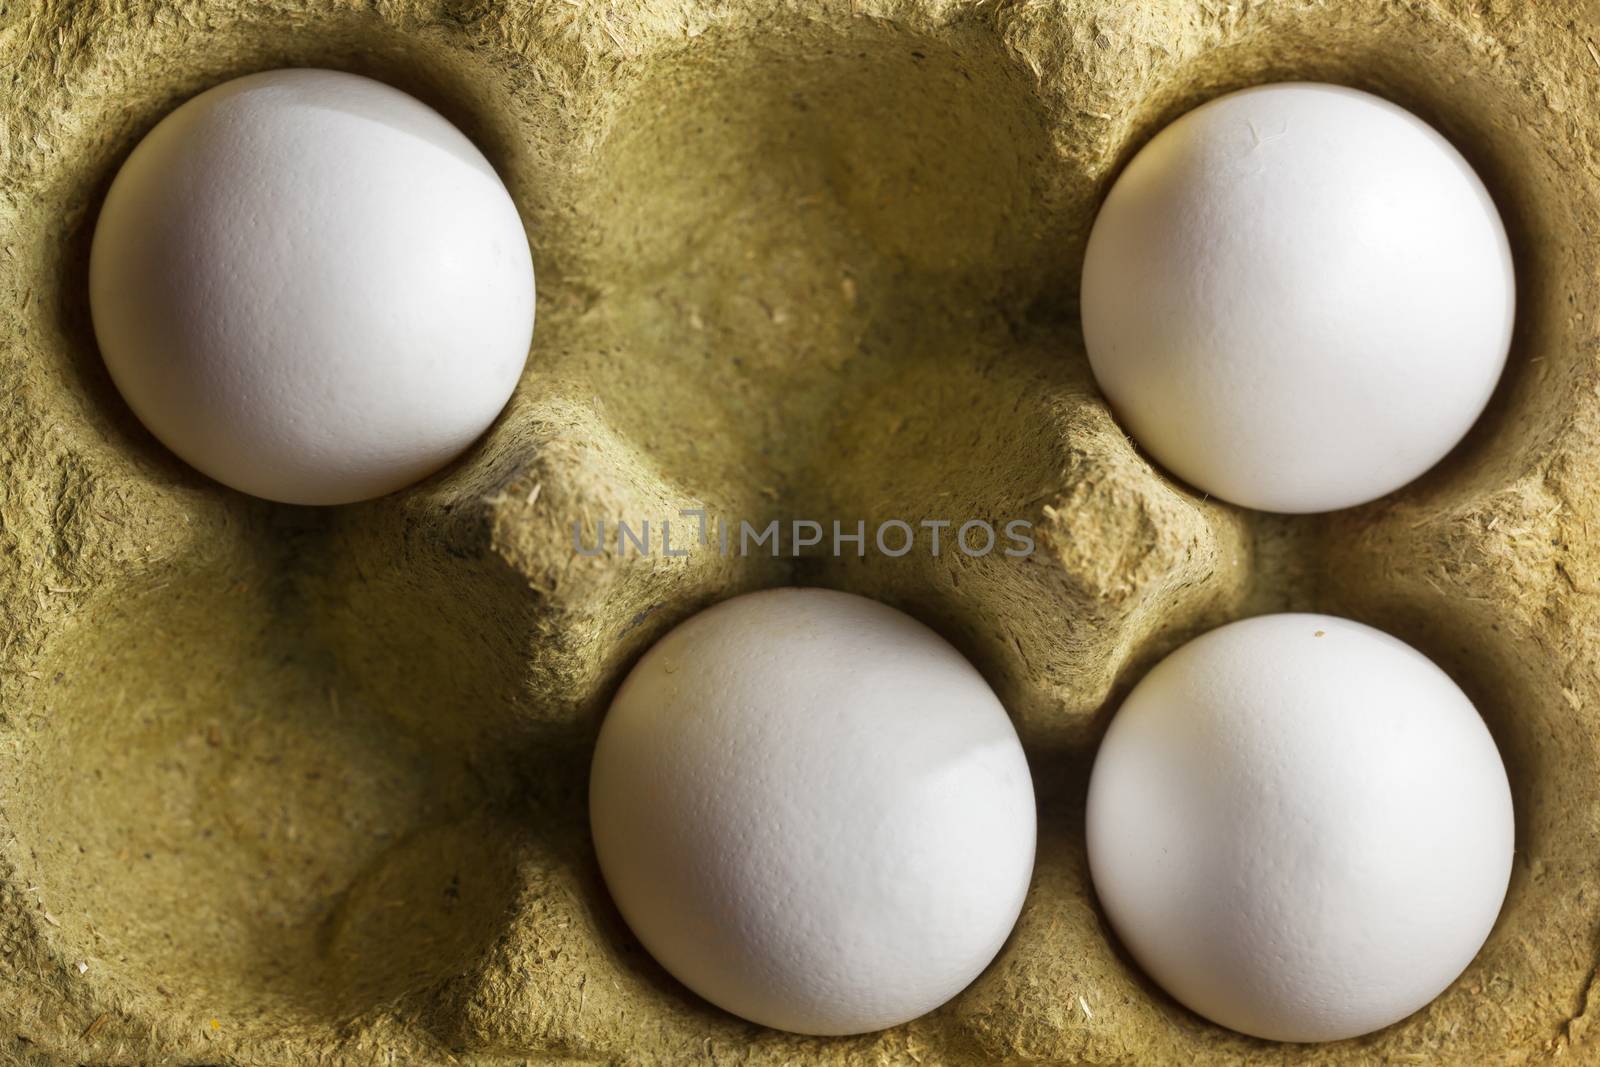 Four white organic eggs in a box consisting 50 percent grass fibers and is fully recyclable